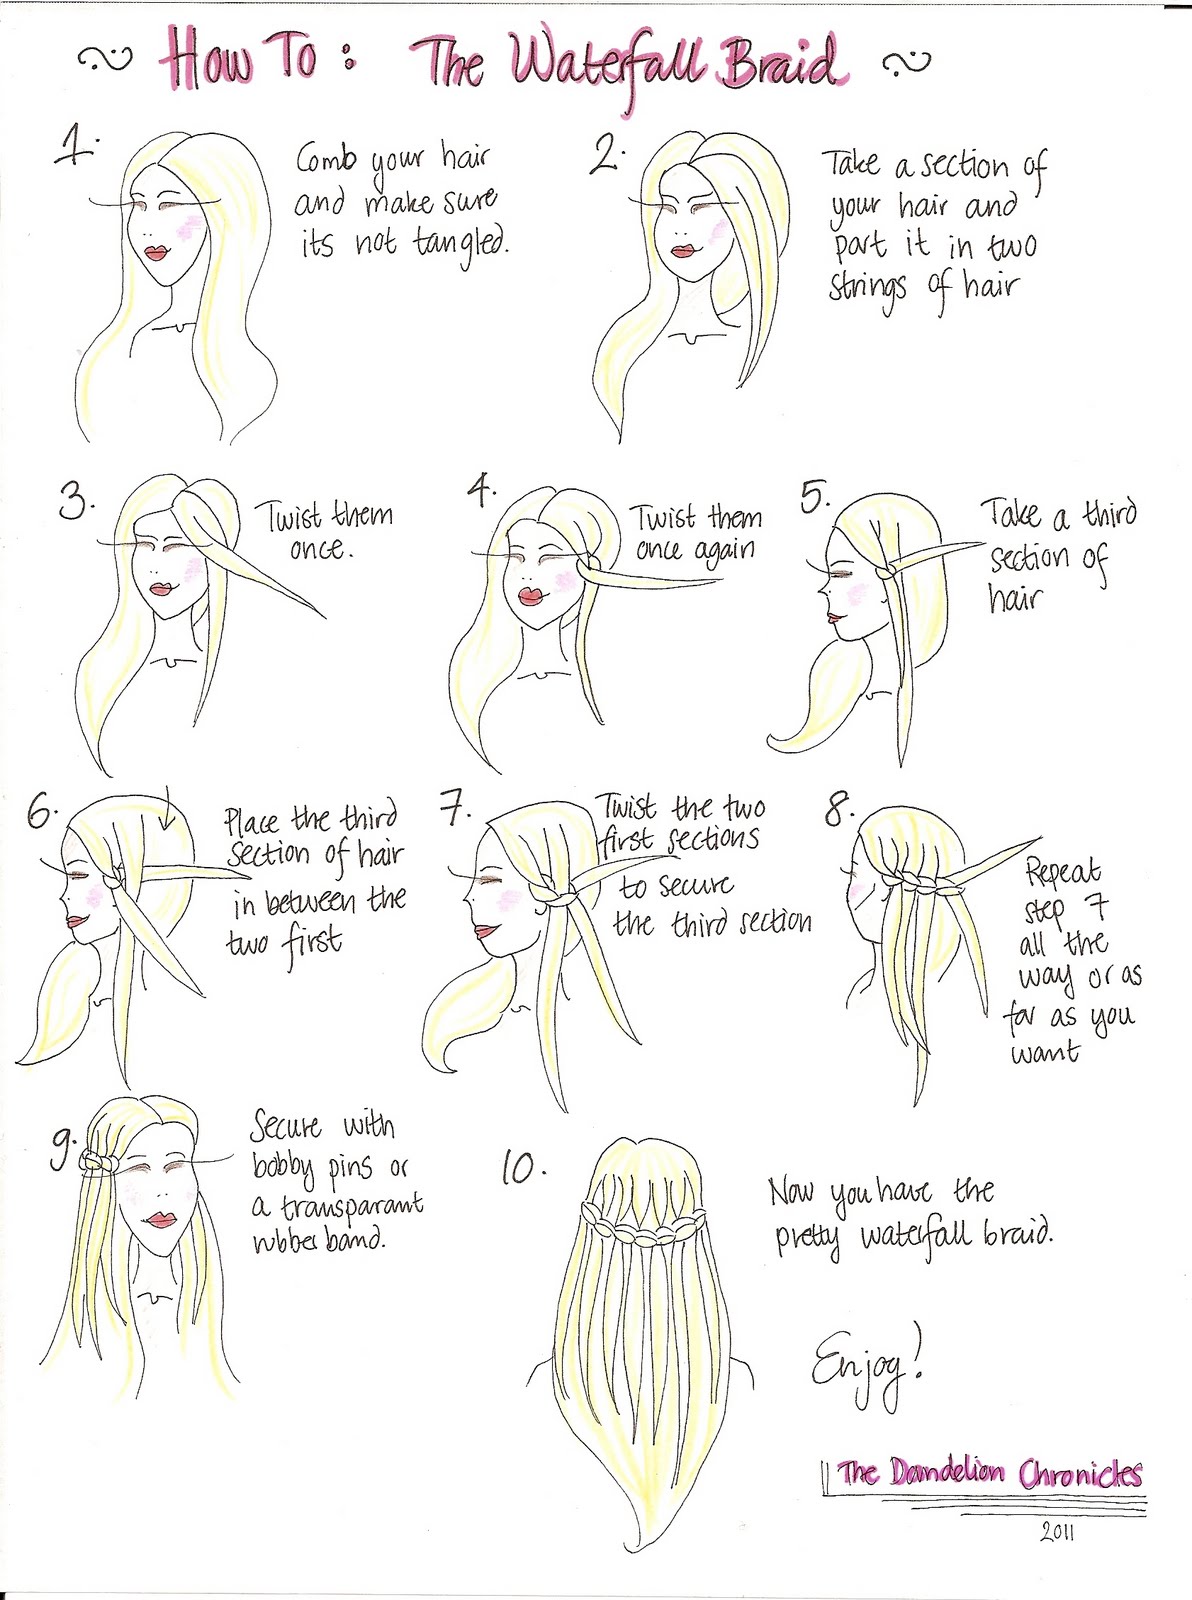 {The Dandelion Chronicles}: How To: The Waterfall Braid ...